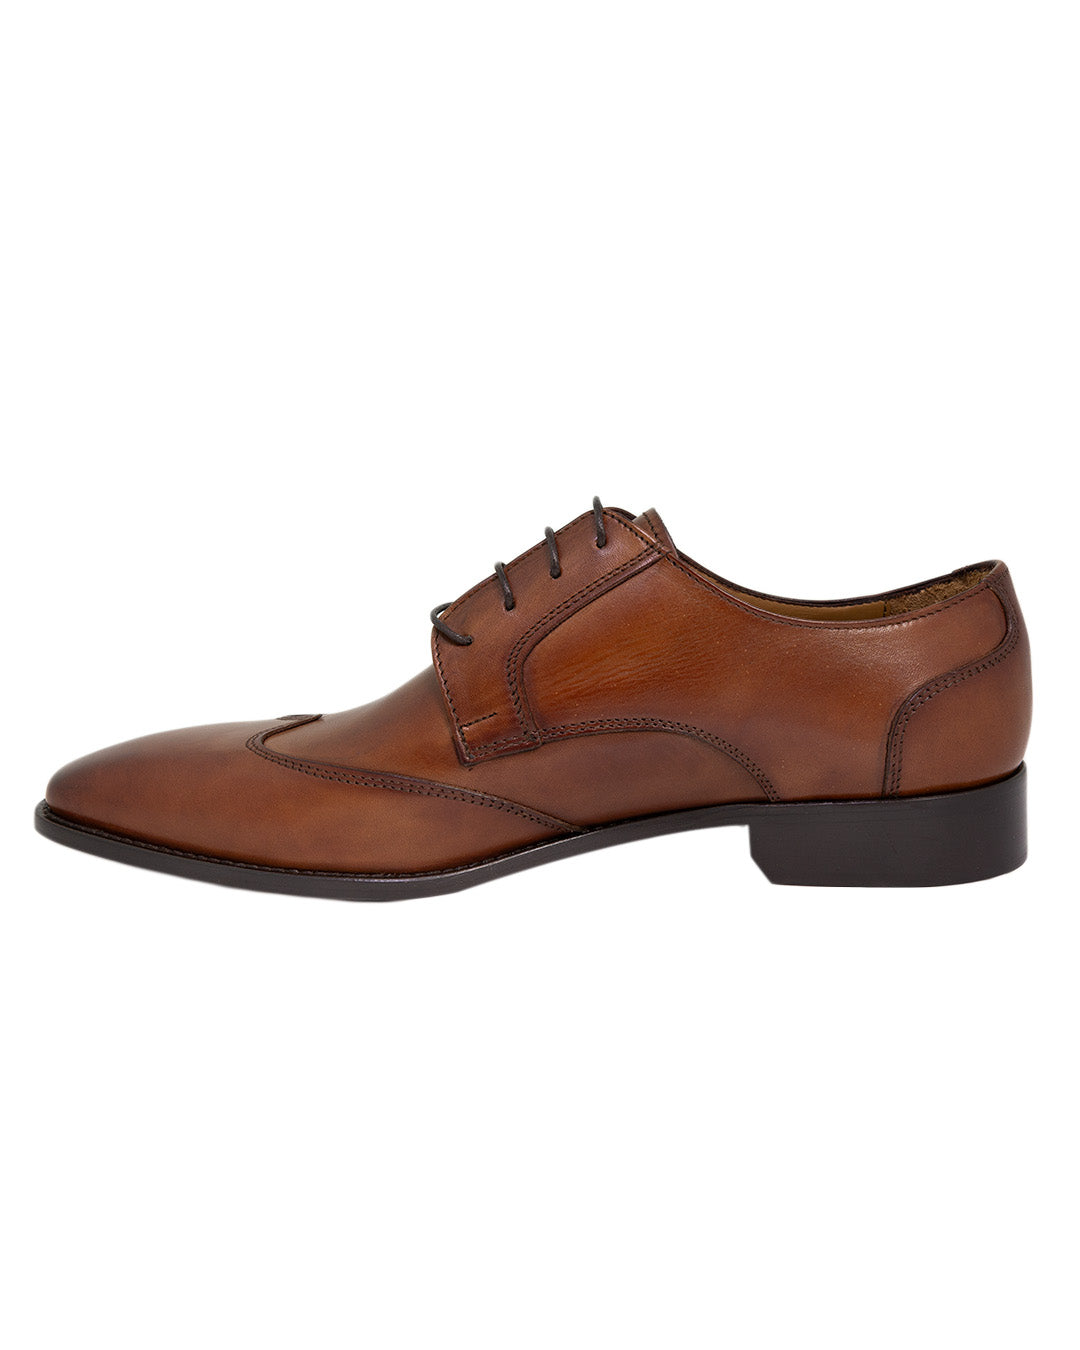 Tan Made in Italy Wing Tip Oxford Shoes